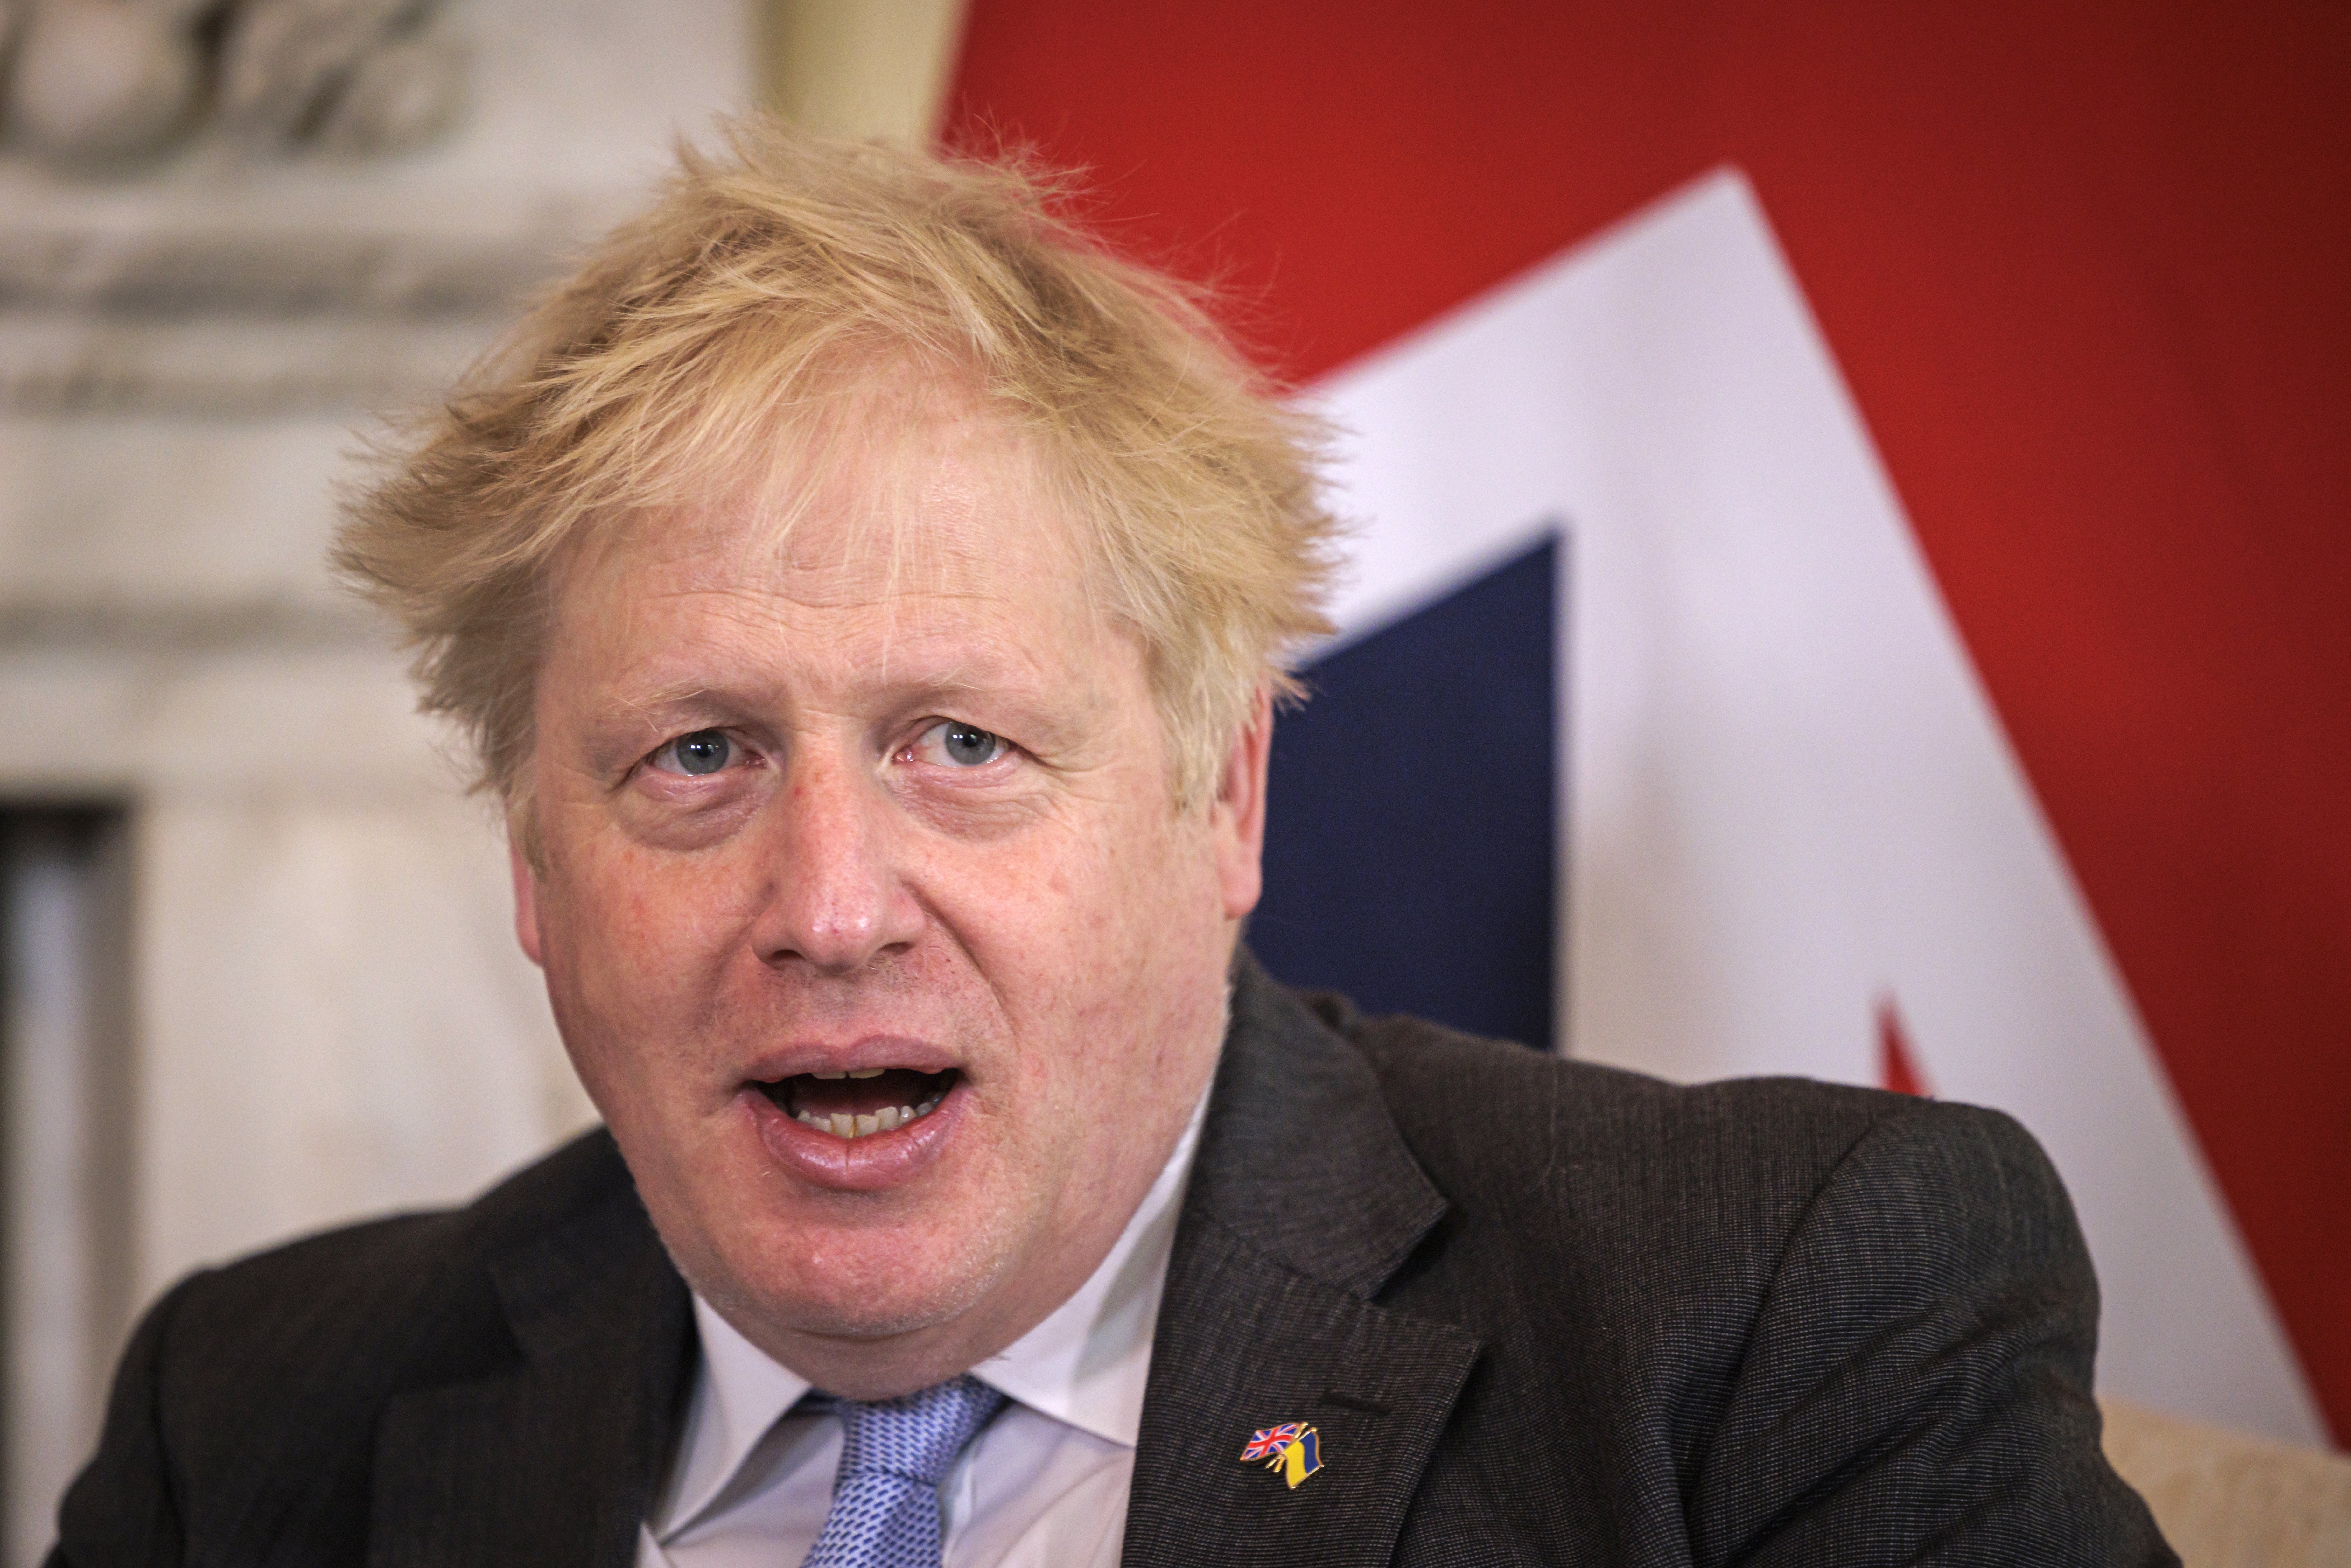 Prime Minister Boris Johnson is leading efforts in the West to support Ukraine following the Russian invasion, Douglas Ross said. (Rob Pinney/PA)